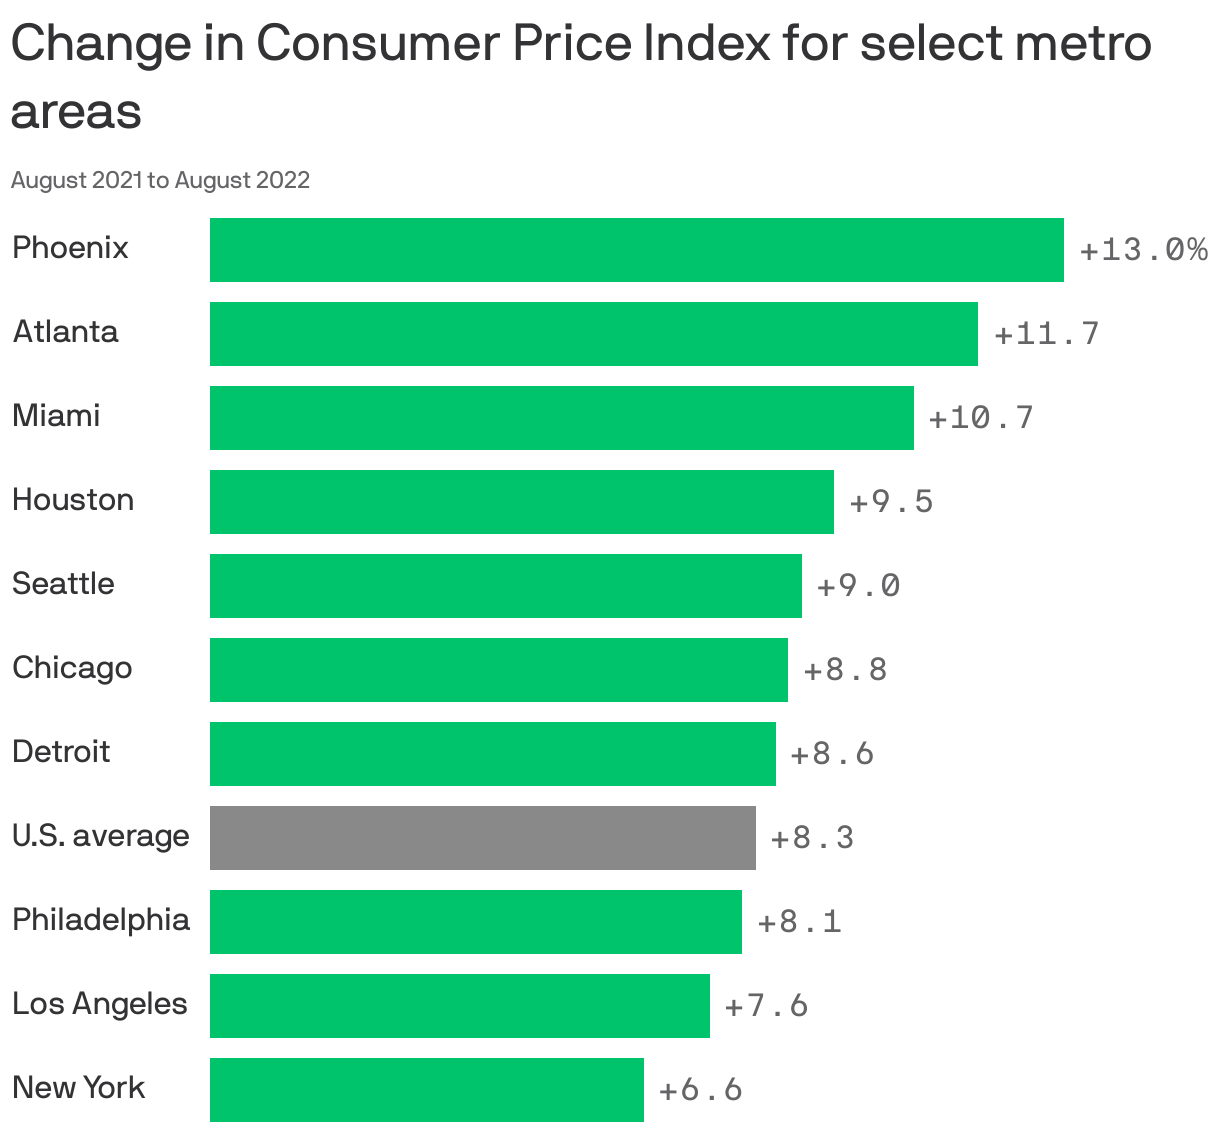 Change in Consumer Price Index for select metro areas